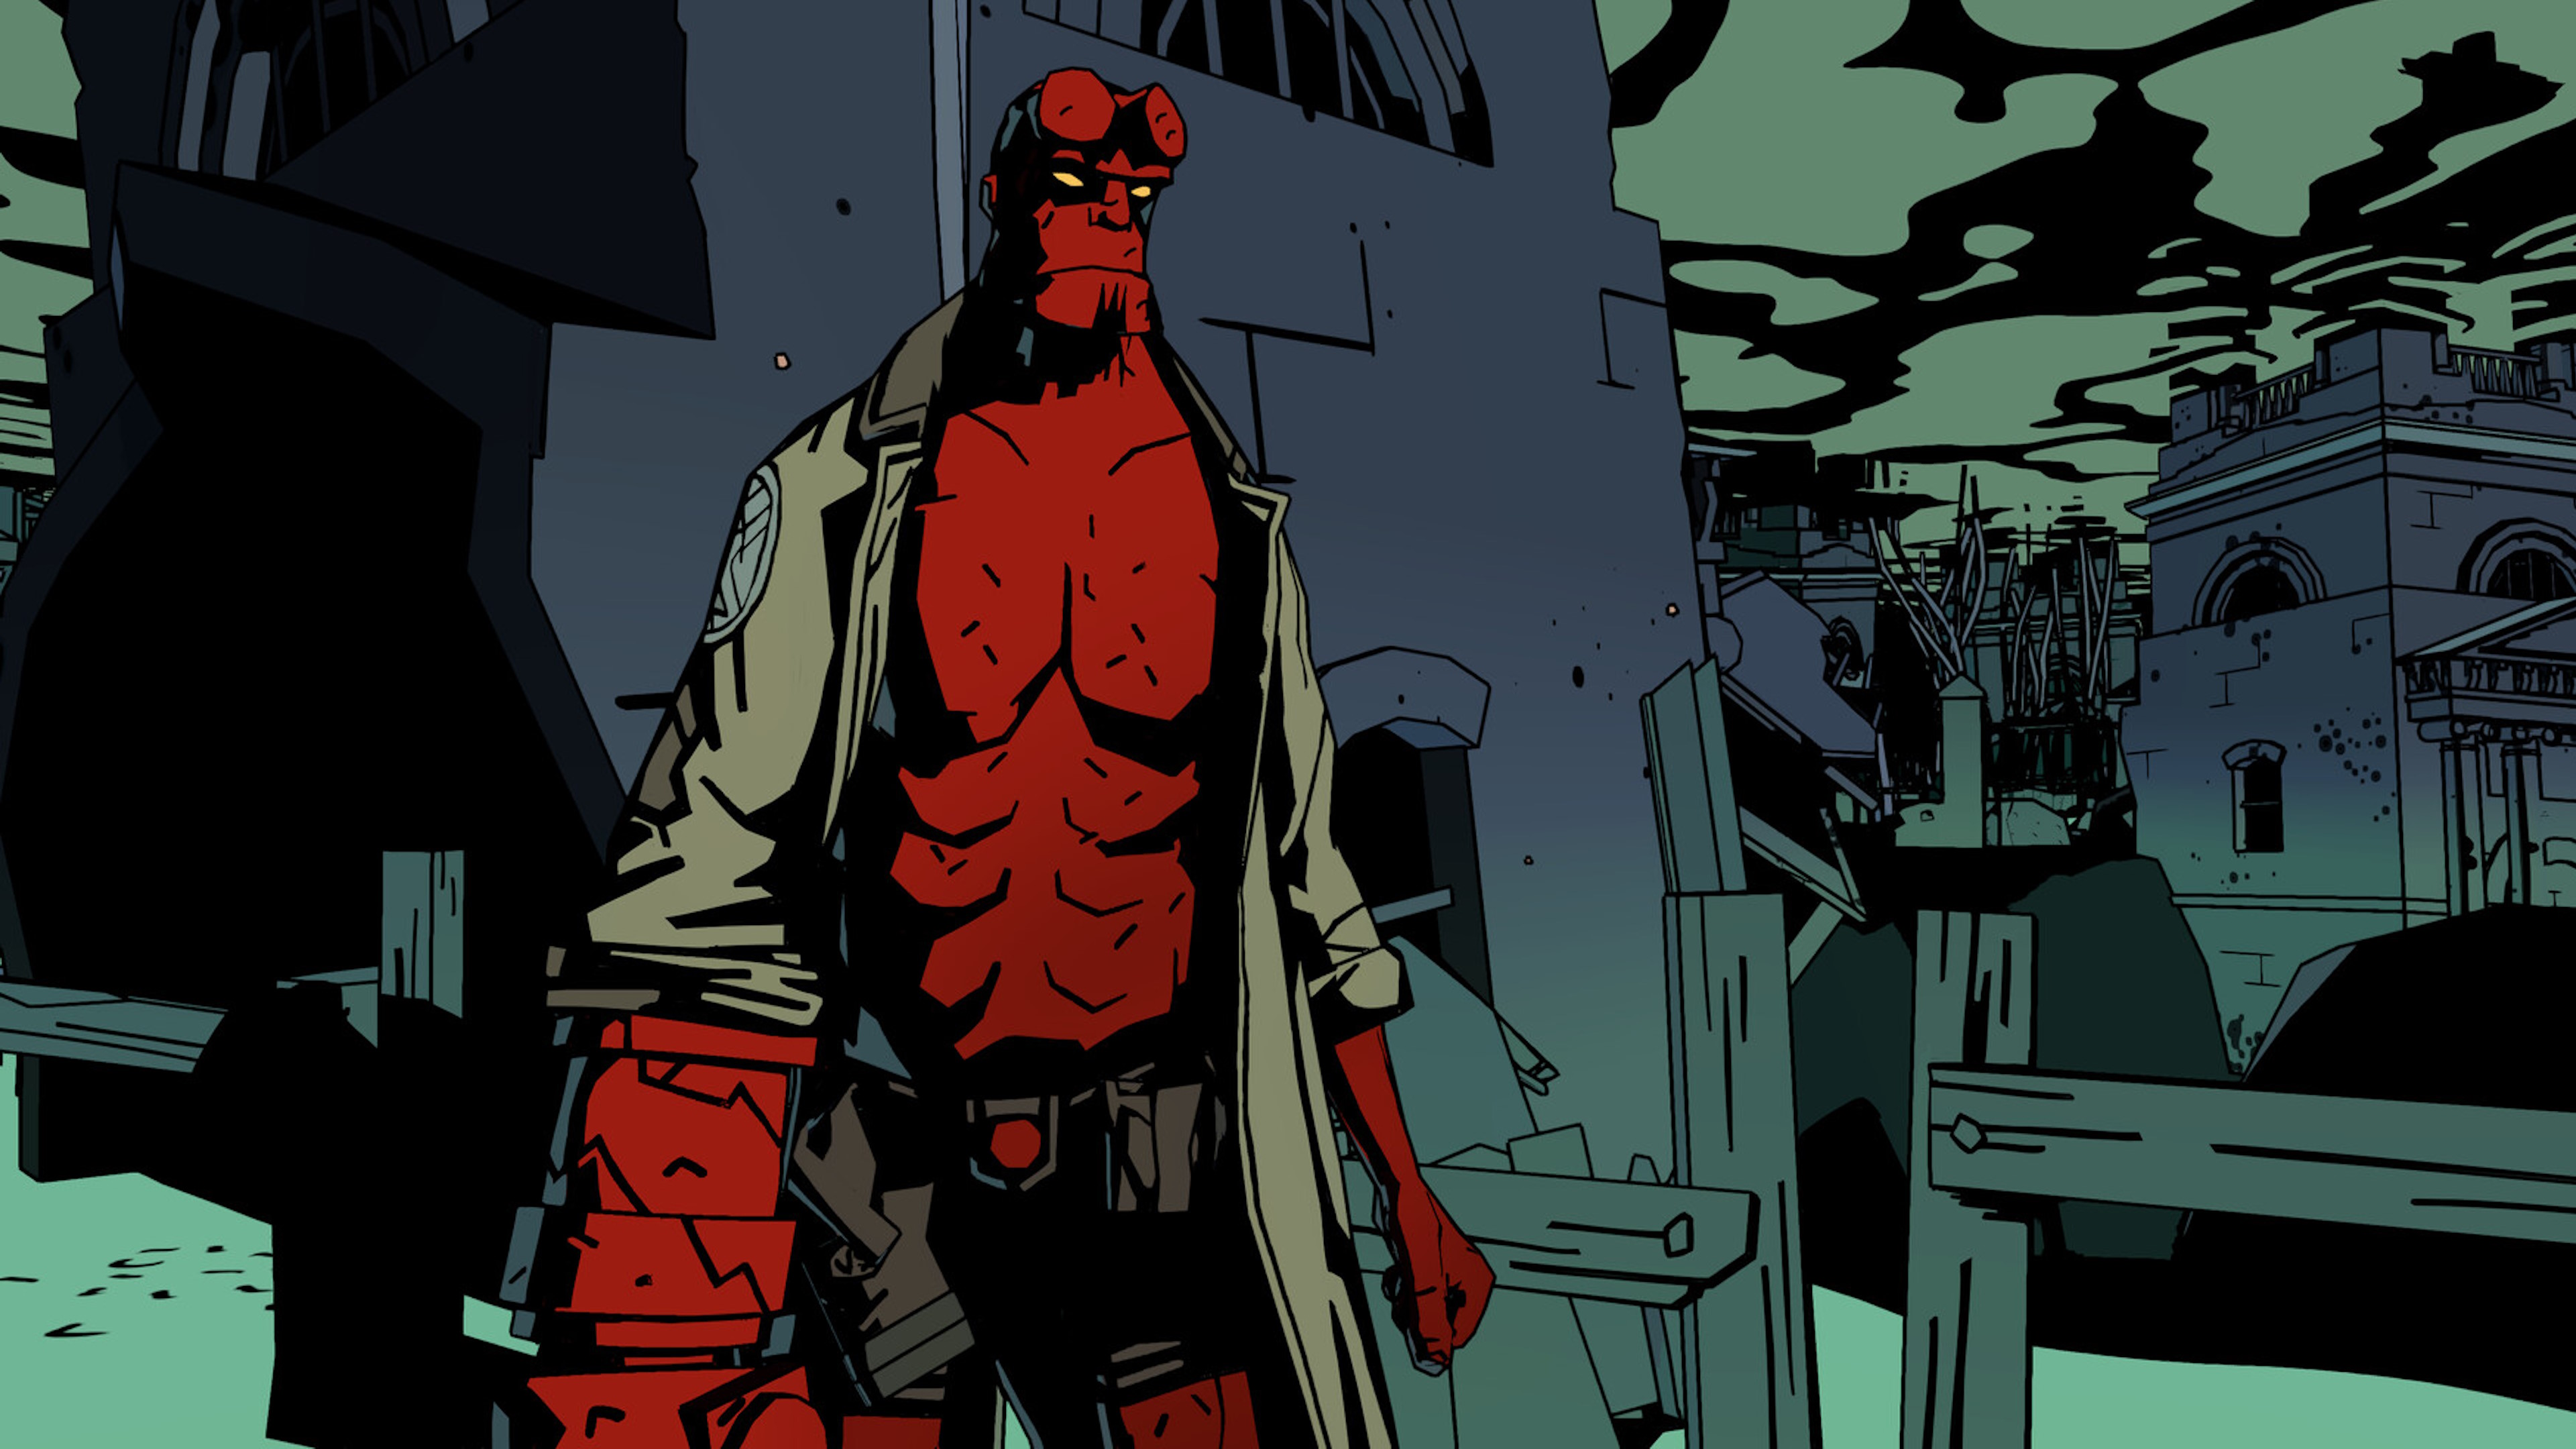  Hellboy Web of Wyrd gameplay trailer confirms that Lance Reddick remains as the voice of Hellboy 